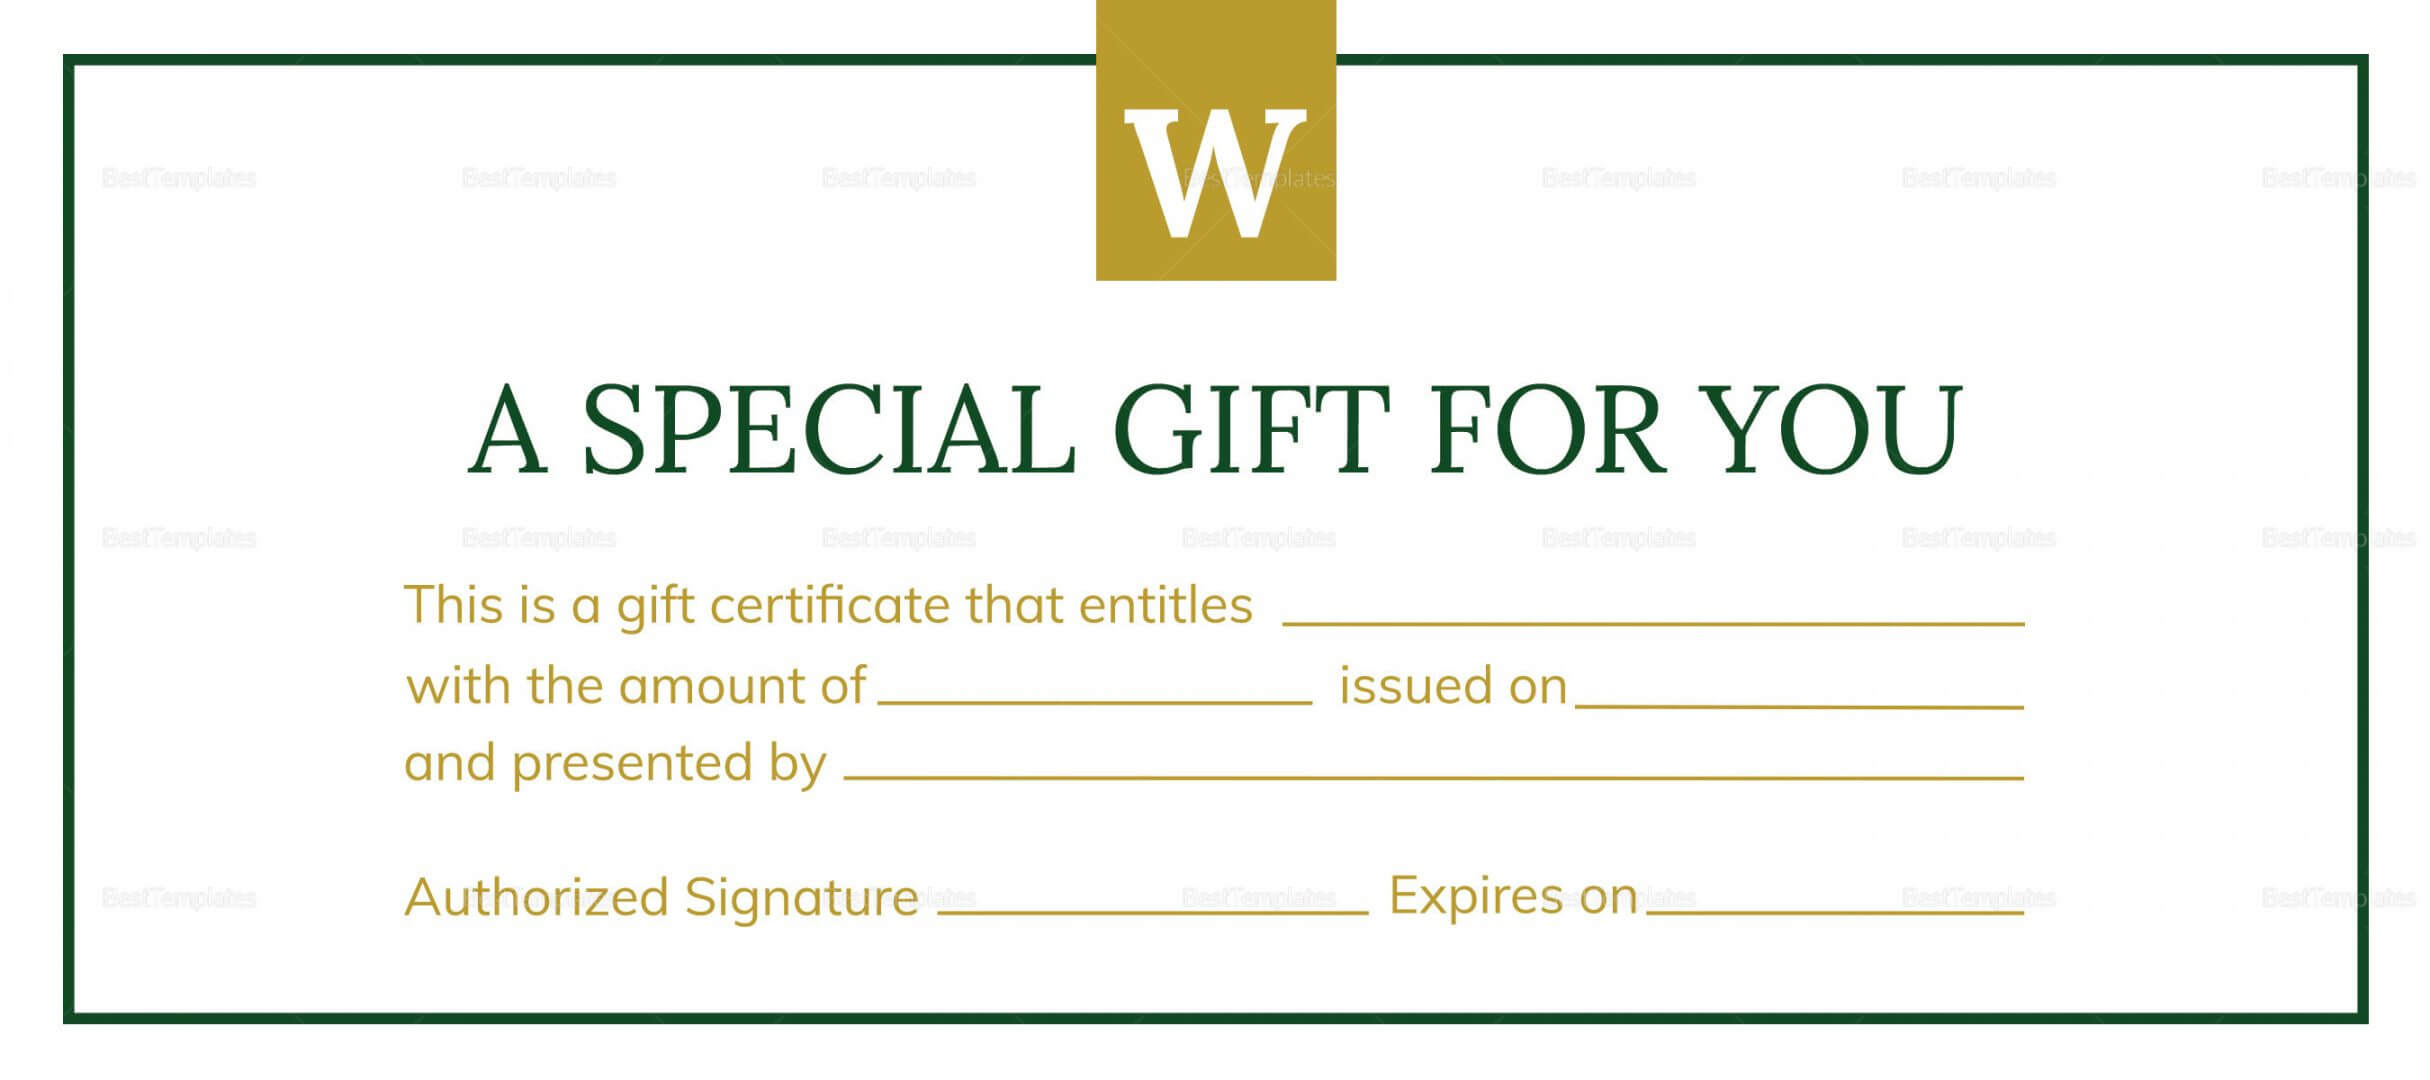 Hotel Gift Certificate Template With This Entitles The Bearer To Template Certificate